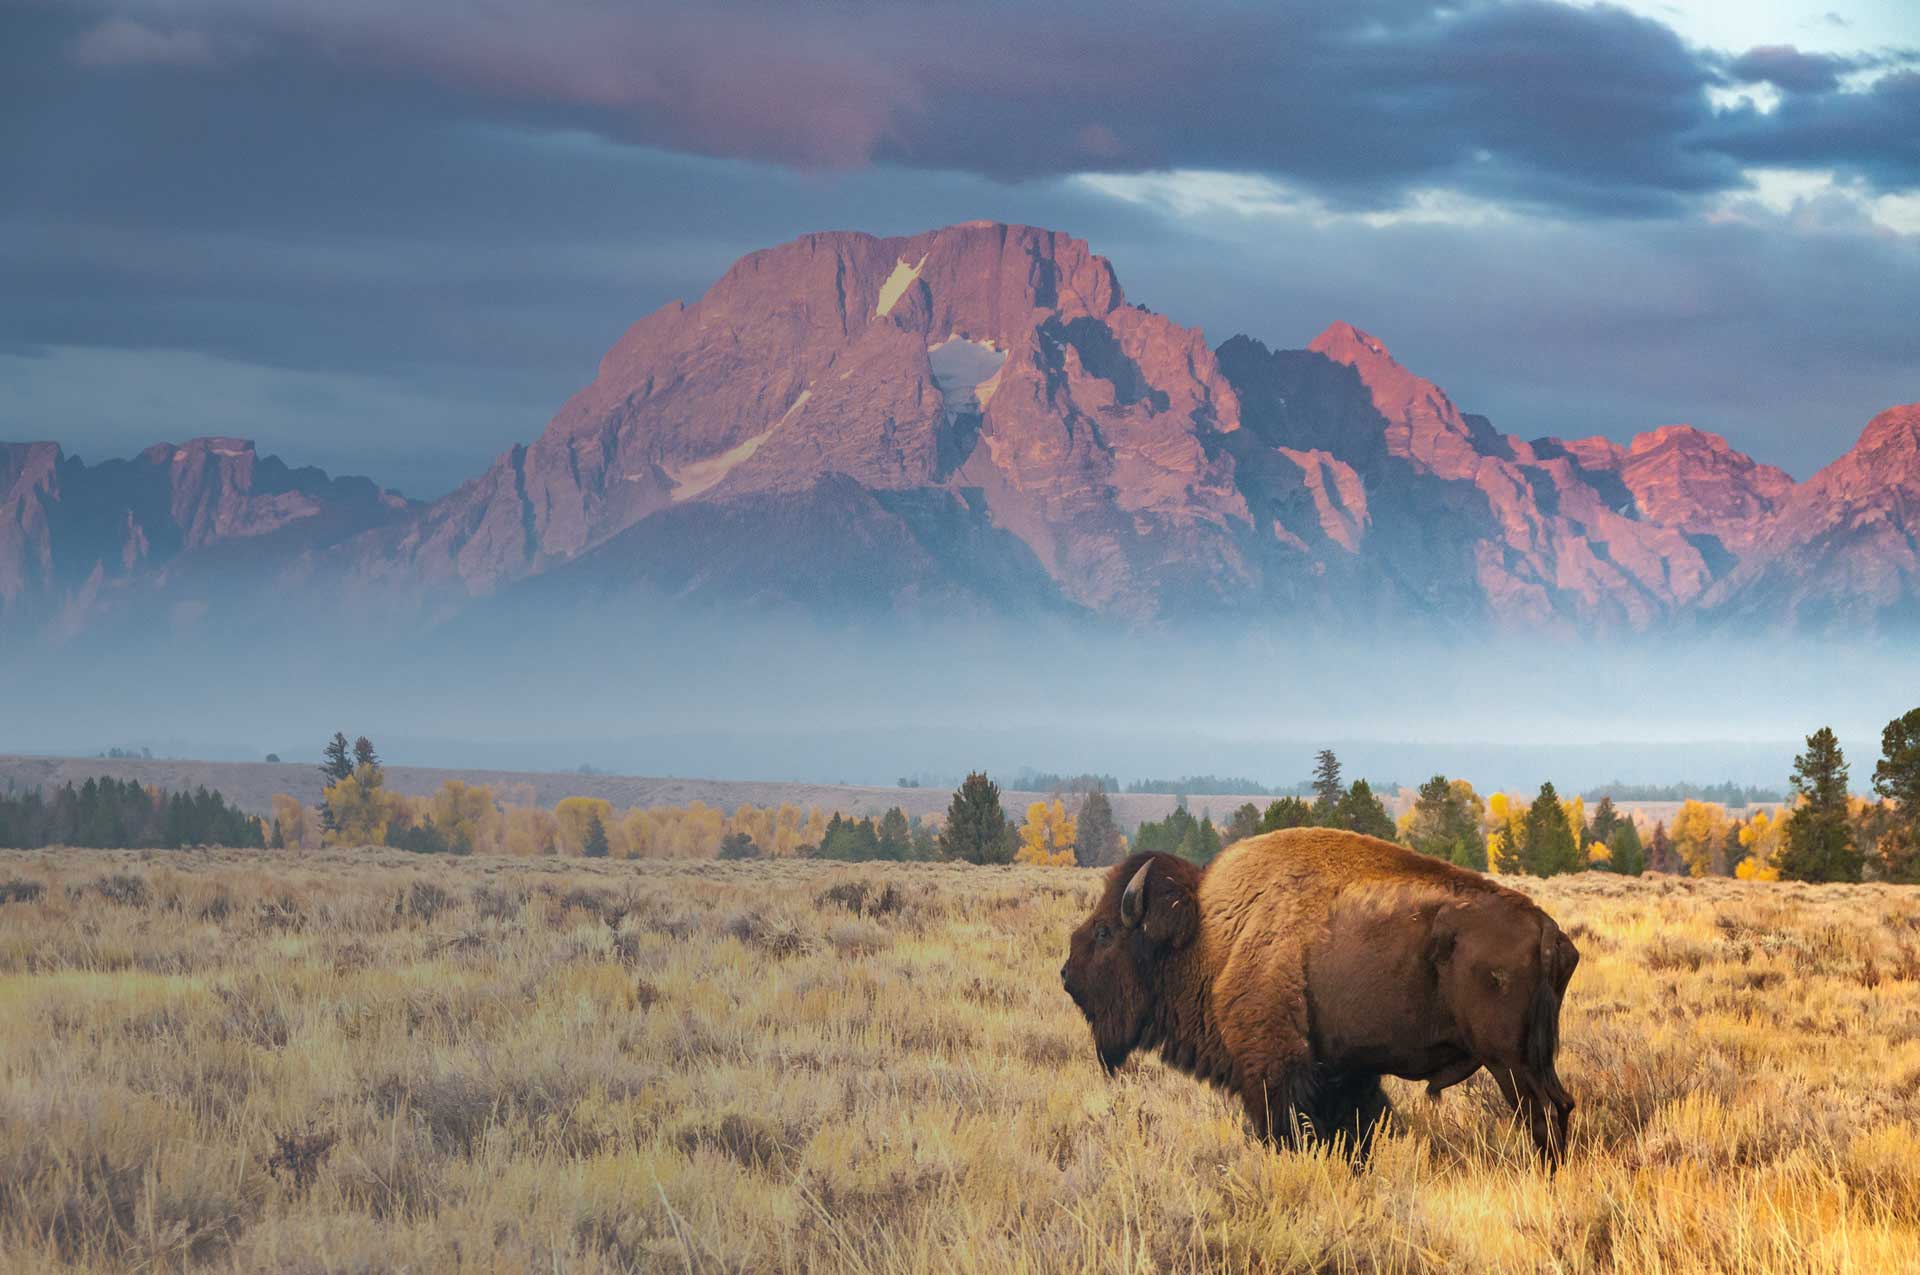 Buffalo in a field with background of mountain in Wyoming countryside 